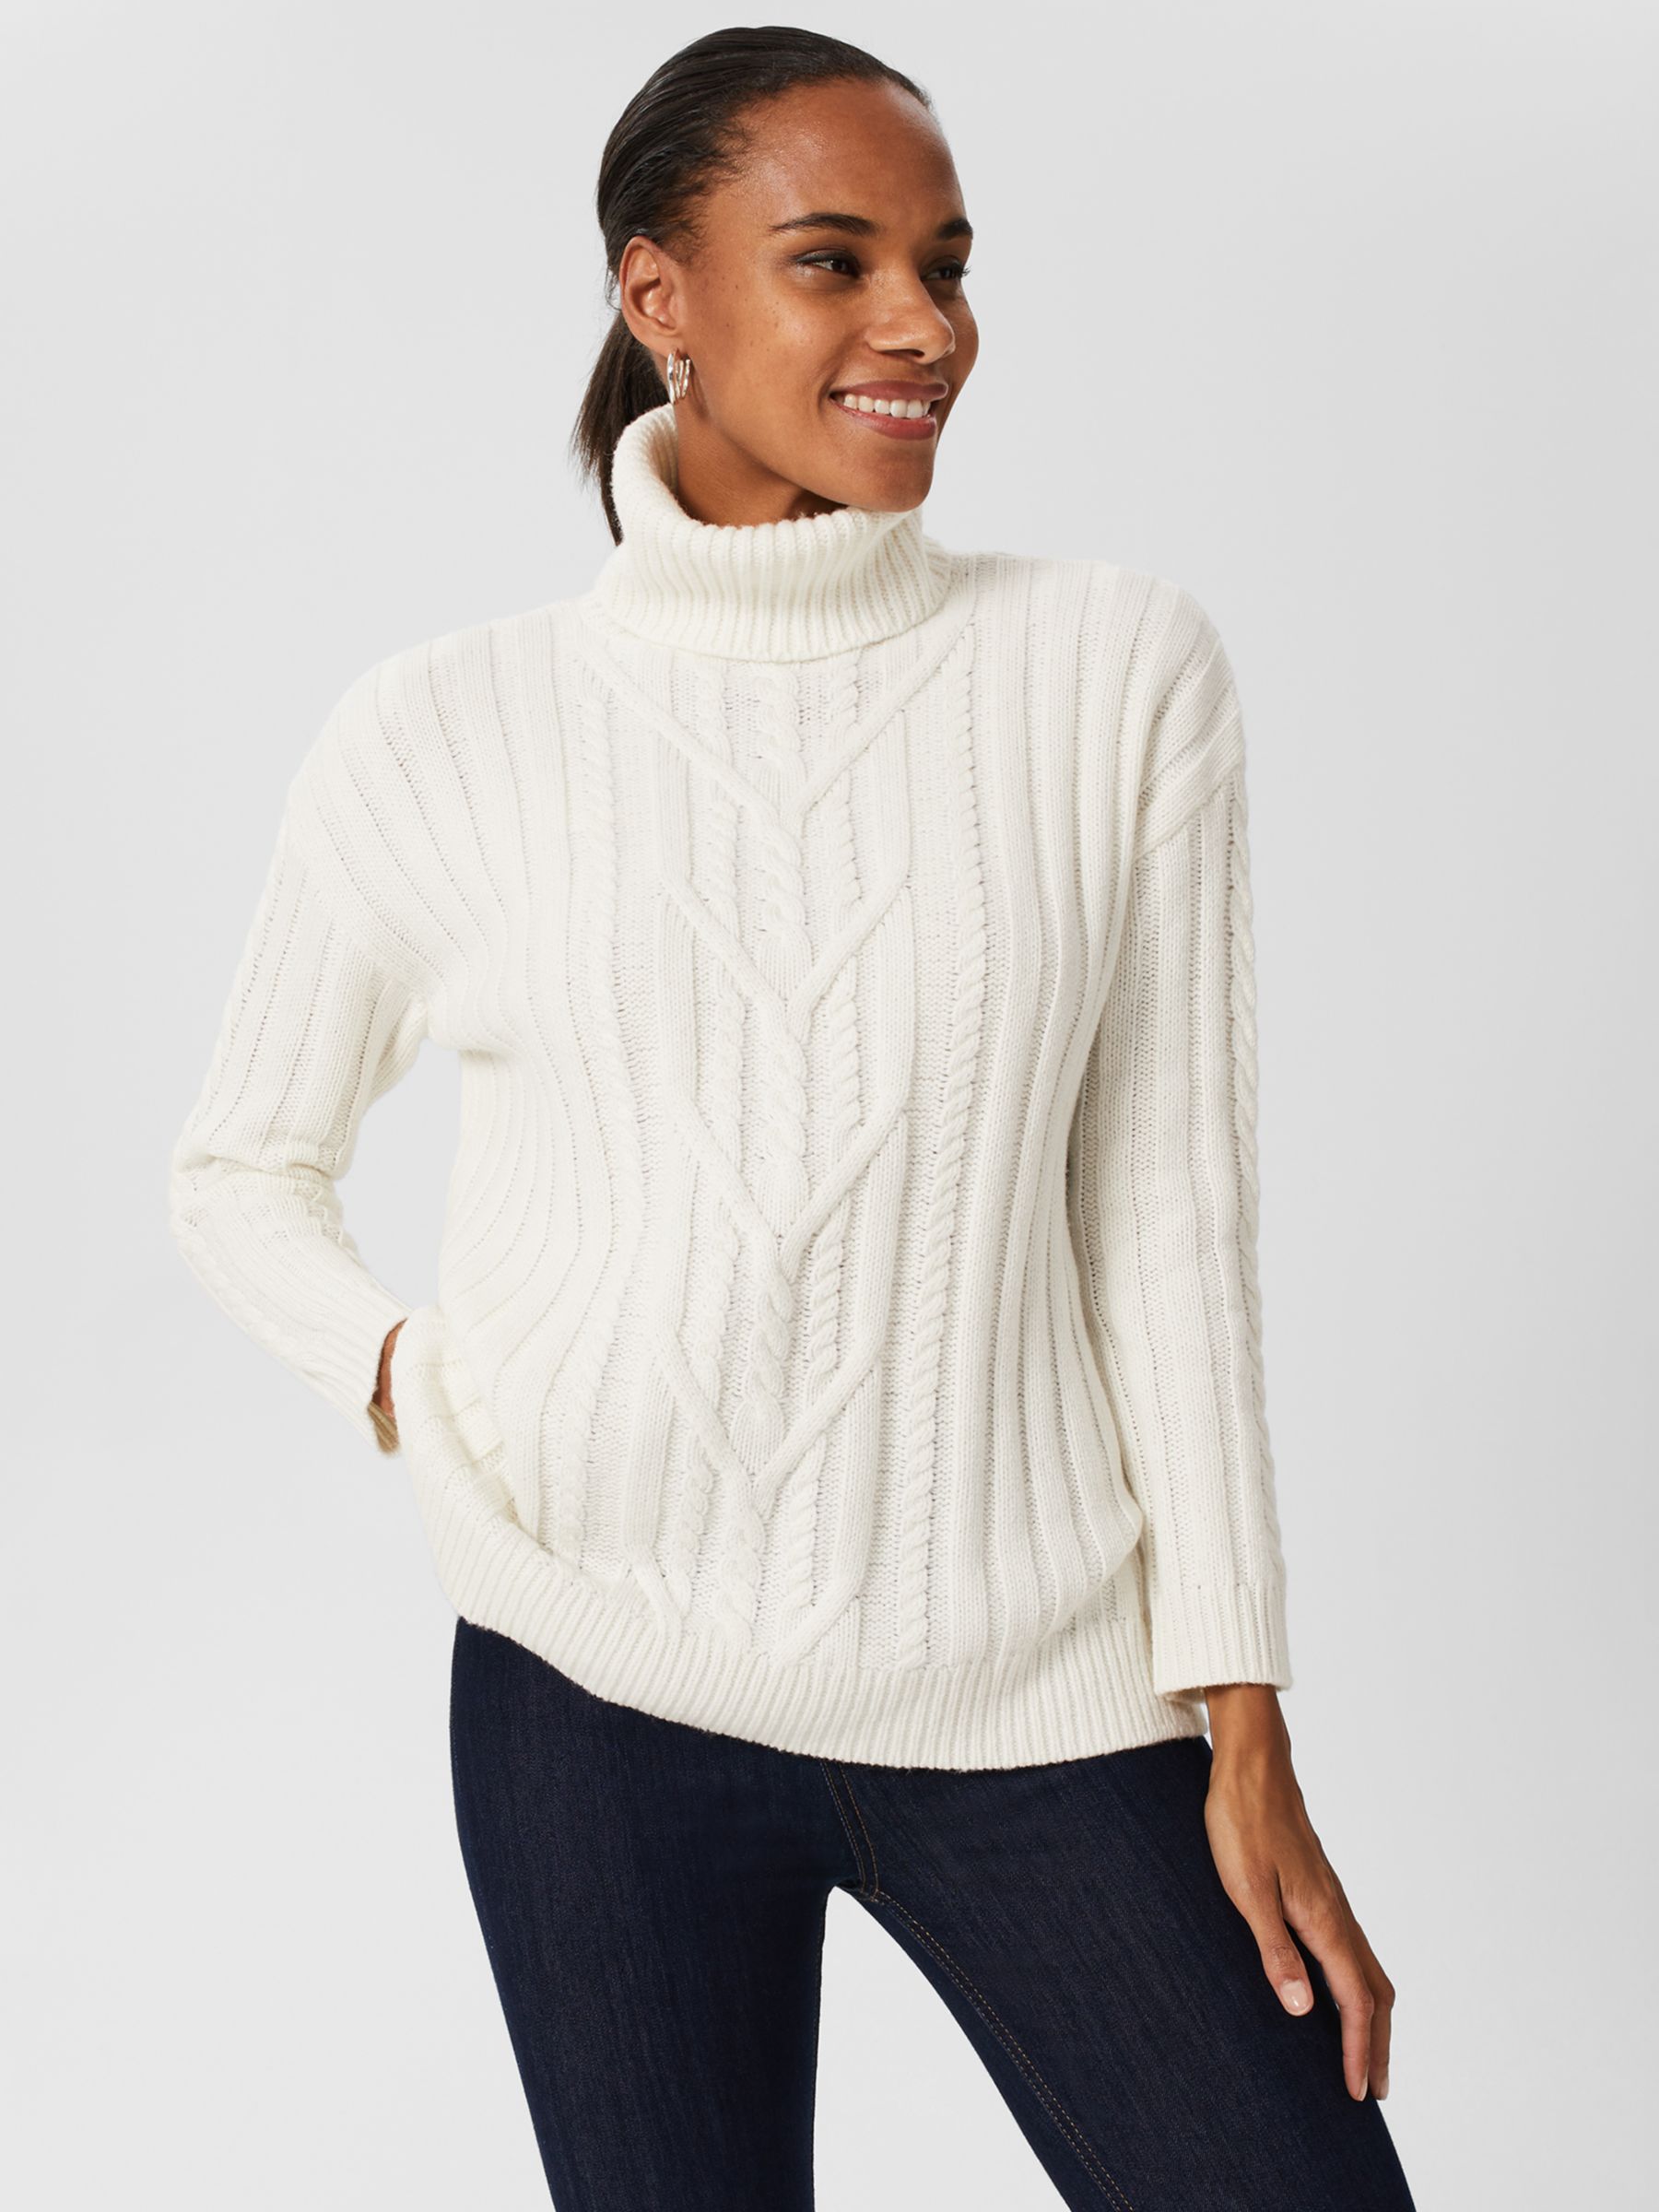 Hobbs Lana Roll Neck Knitted Jumper, Ivory at John Lewis & Partners